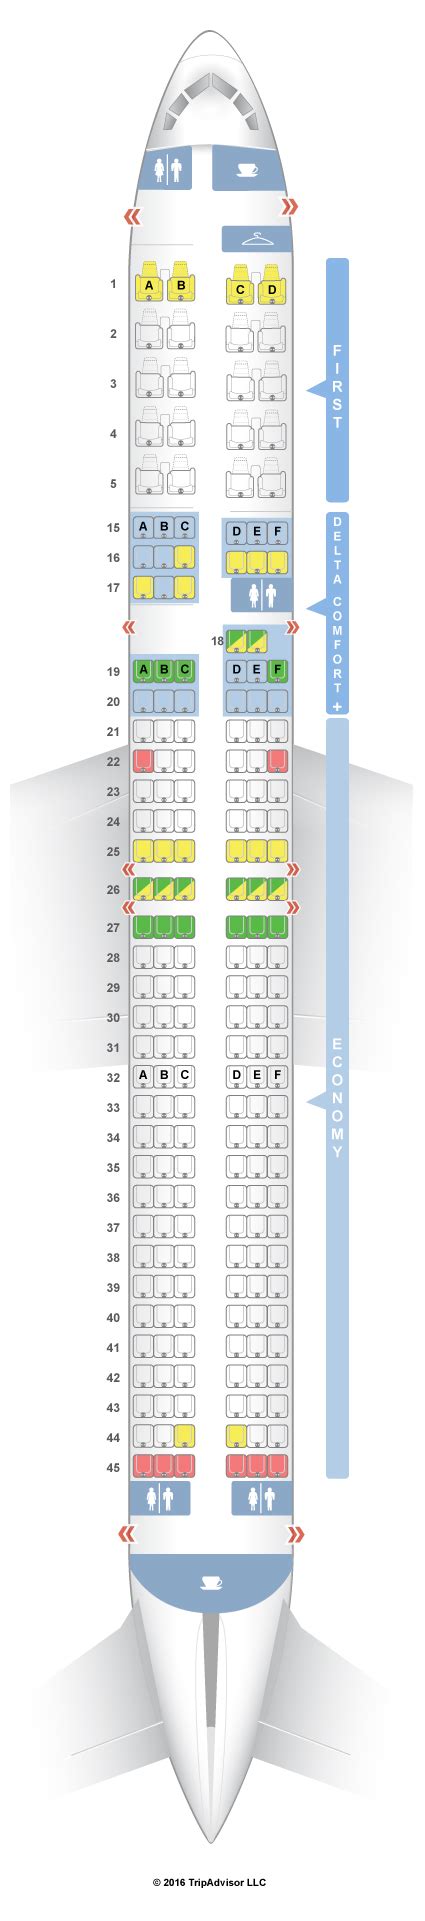 The seat map of this United Airlines 777-200 is confi